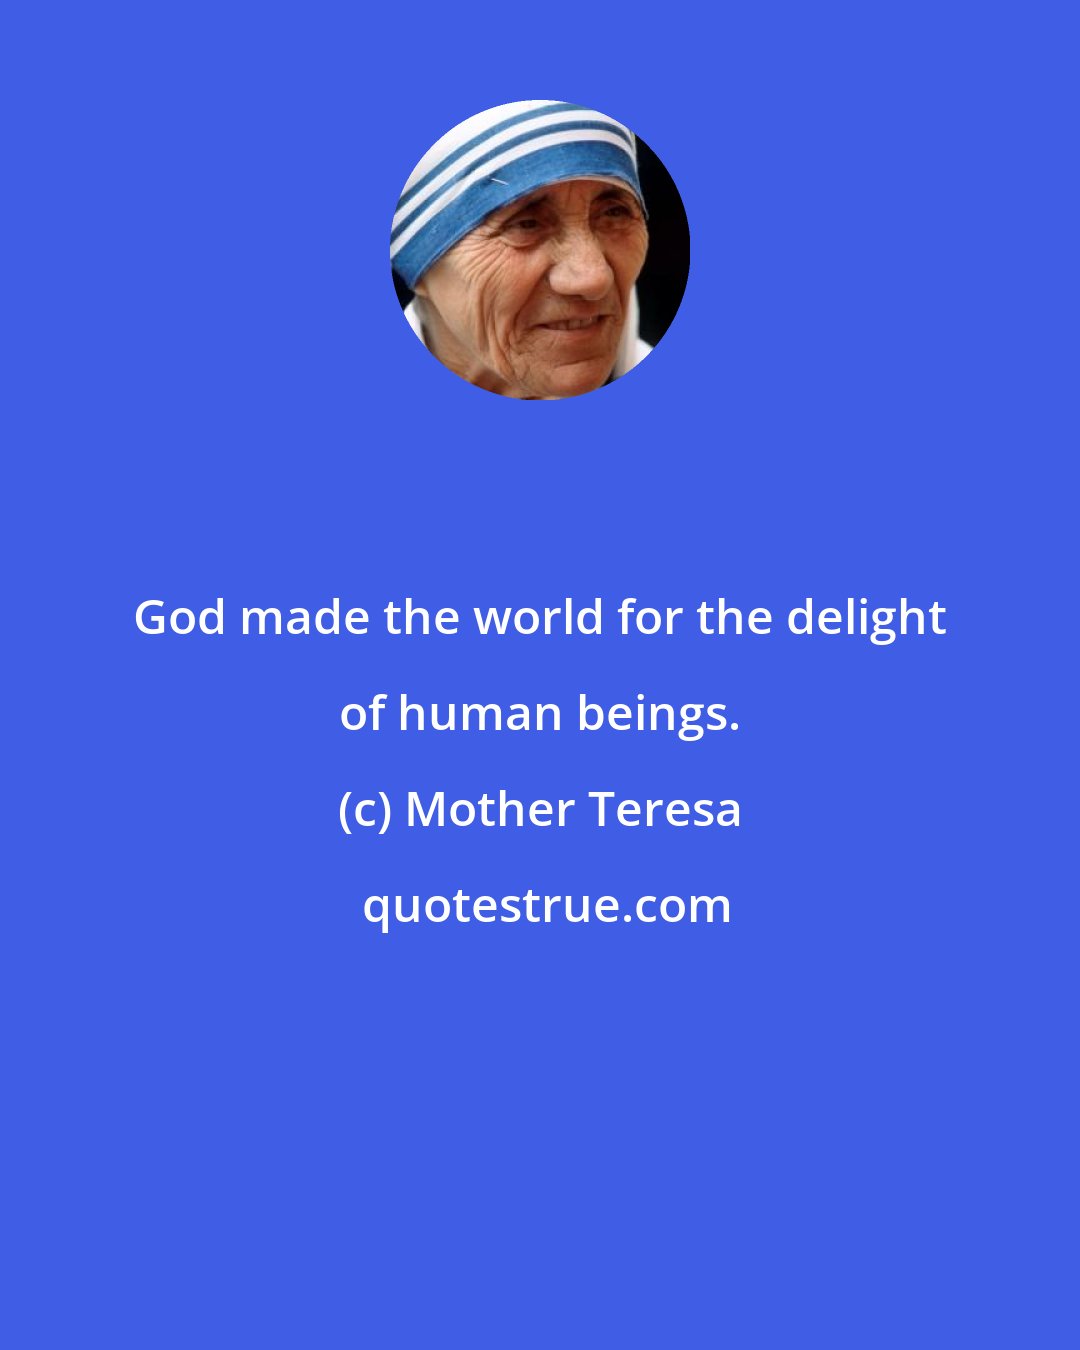 Mother Teresa: God made the world for the delight of human beings.